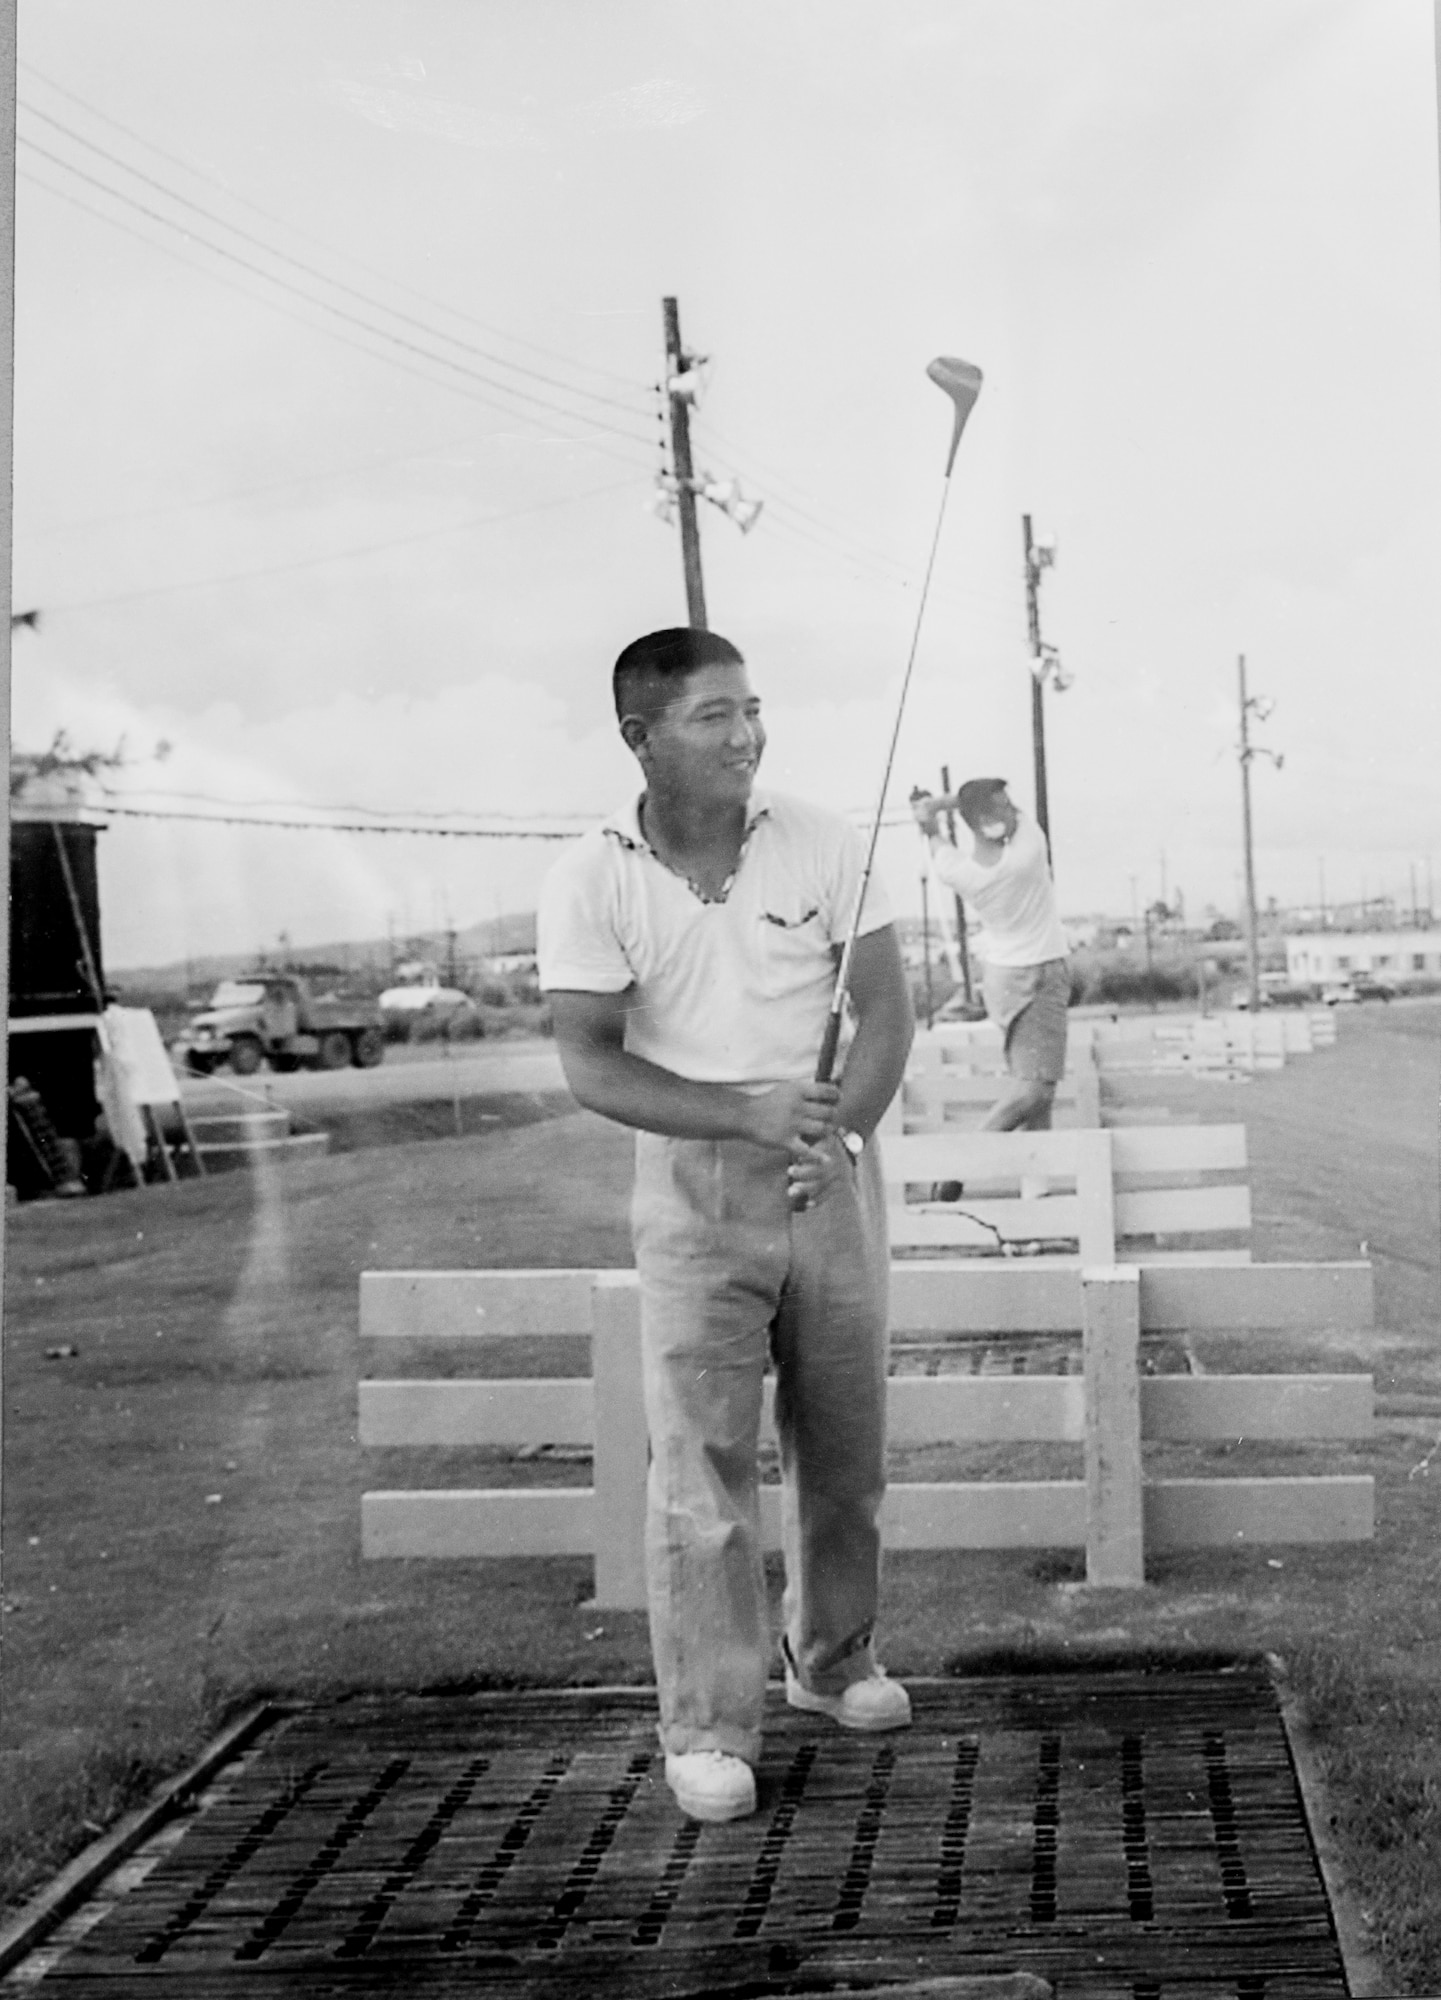 Tatsuo “Jimmy” Schwartz practices his golf at a driving range. Schwartz has maintained the golf courses of Kadena Air Base, Japan, for more than 30 years.